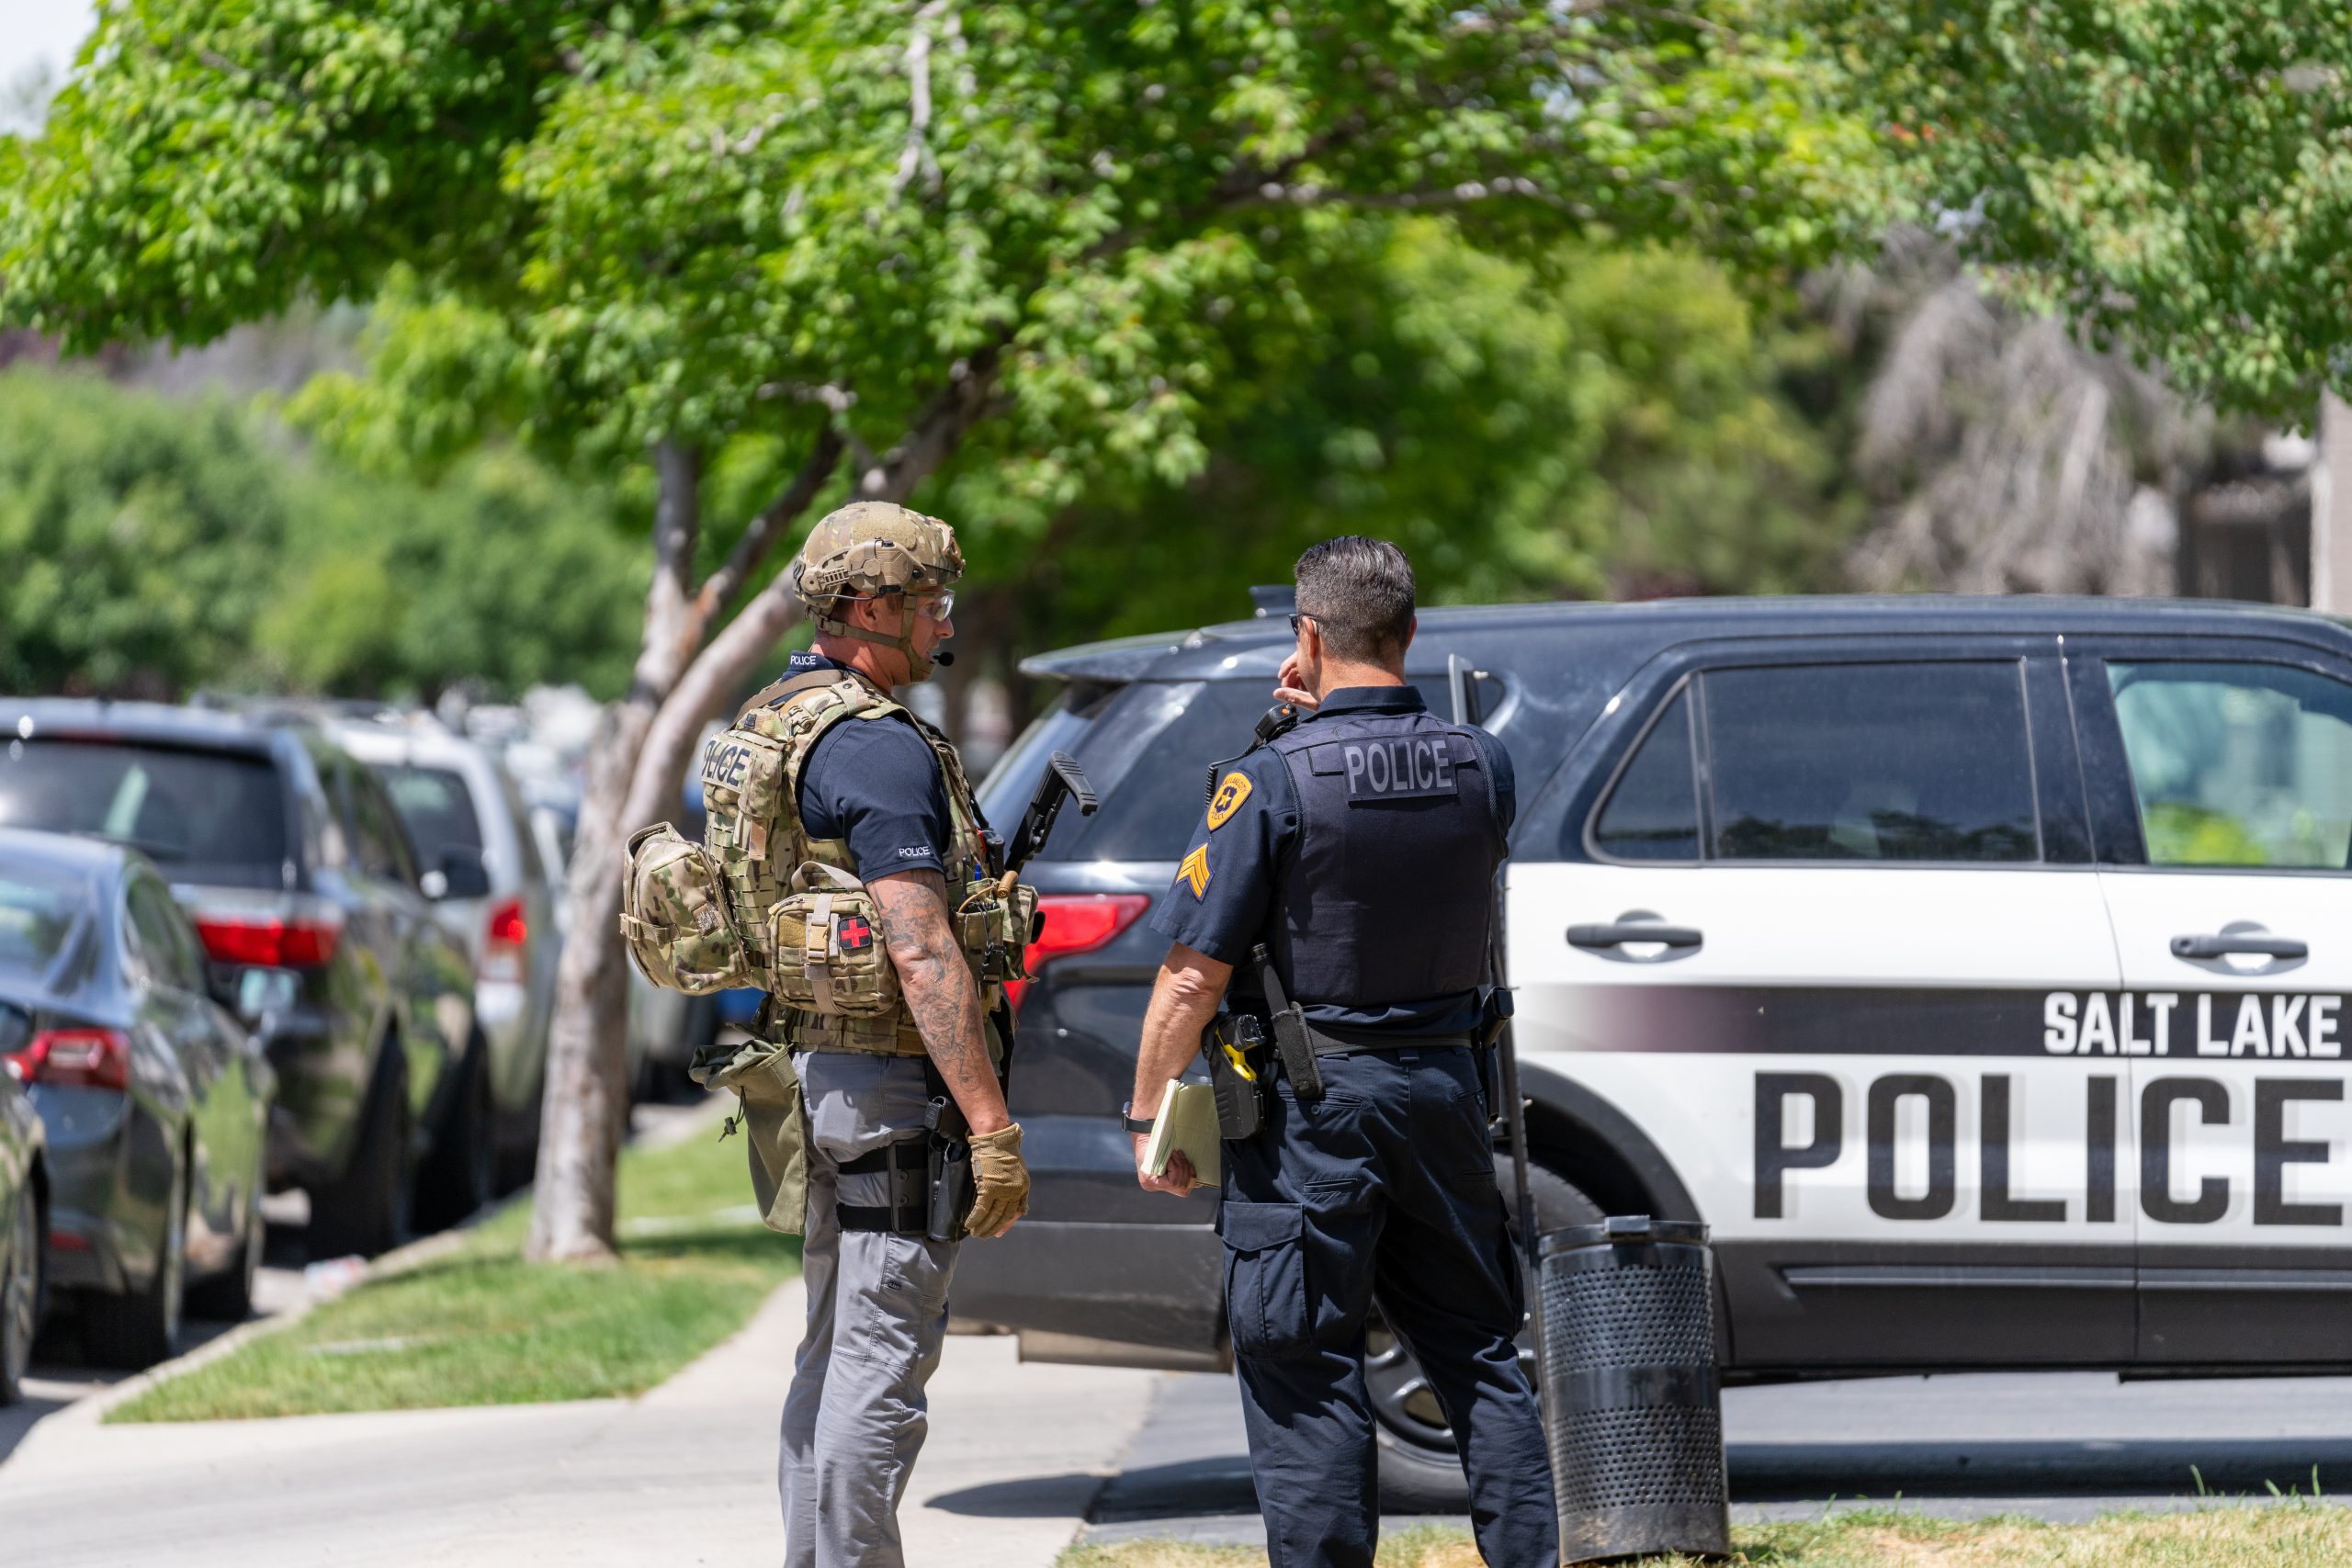 1-SLCPD Sergeant and SLCPD SWAT Operator on scene of a domestic violence incident (SLCPD photo | June 22, 2023).